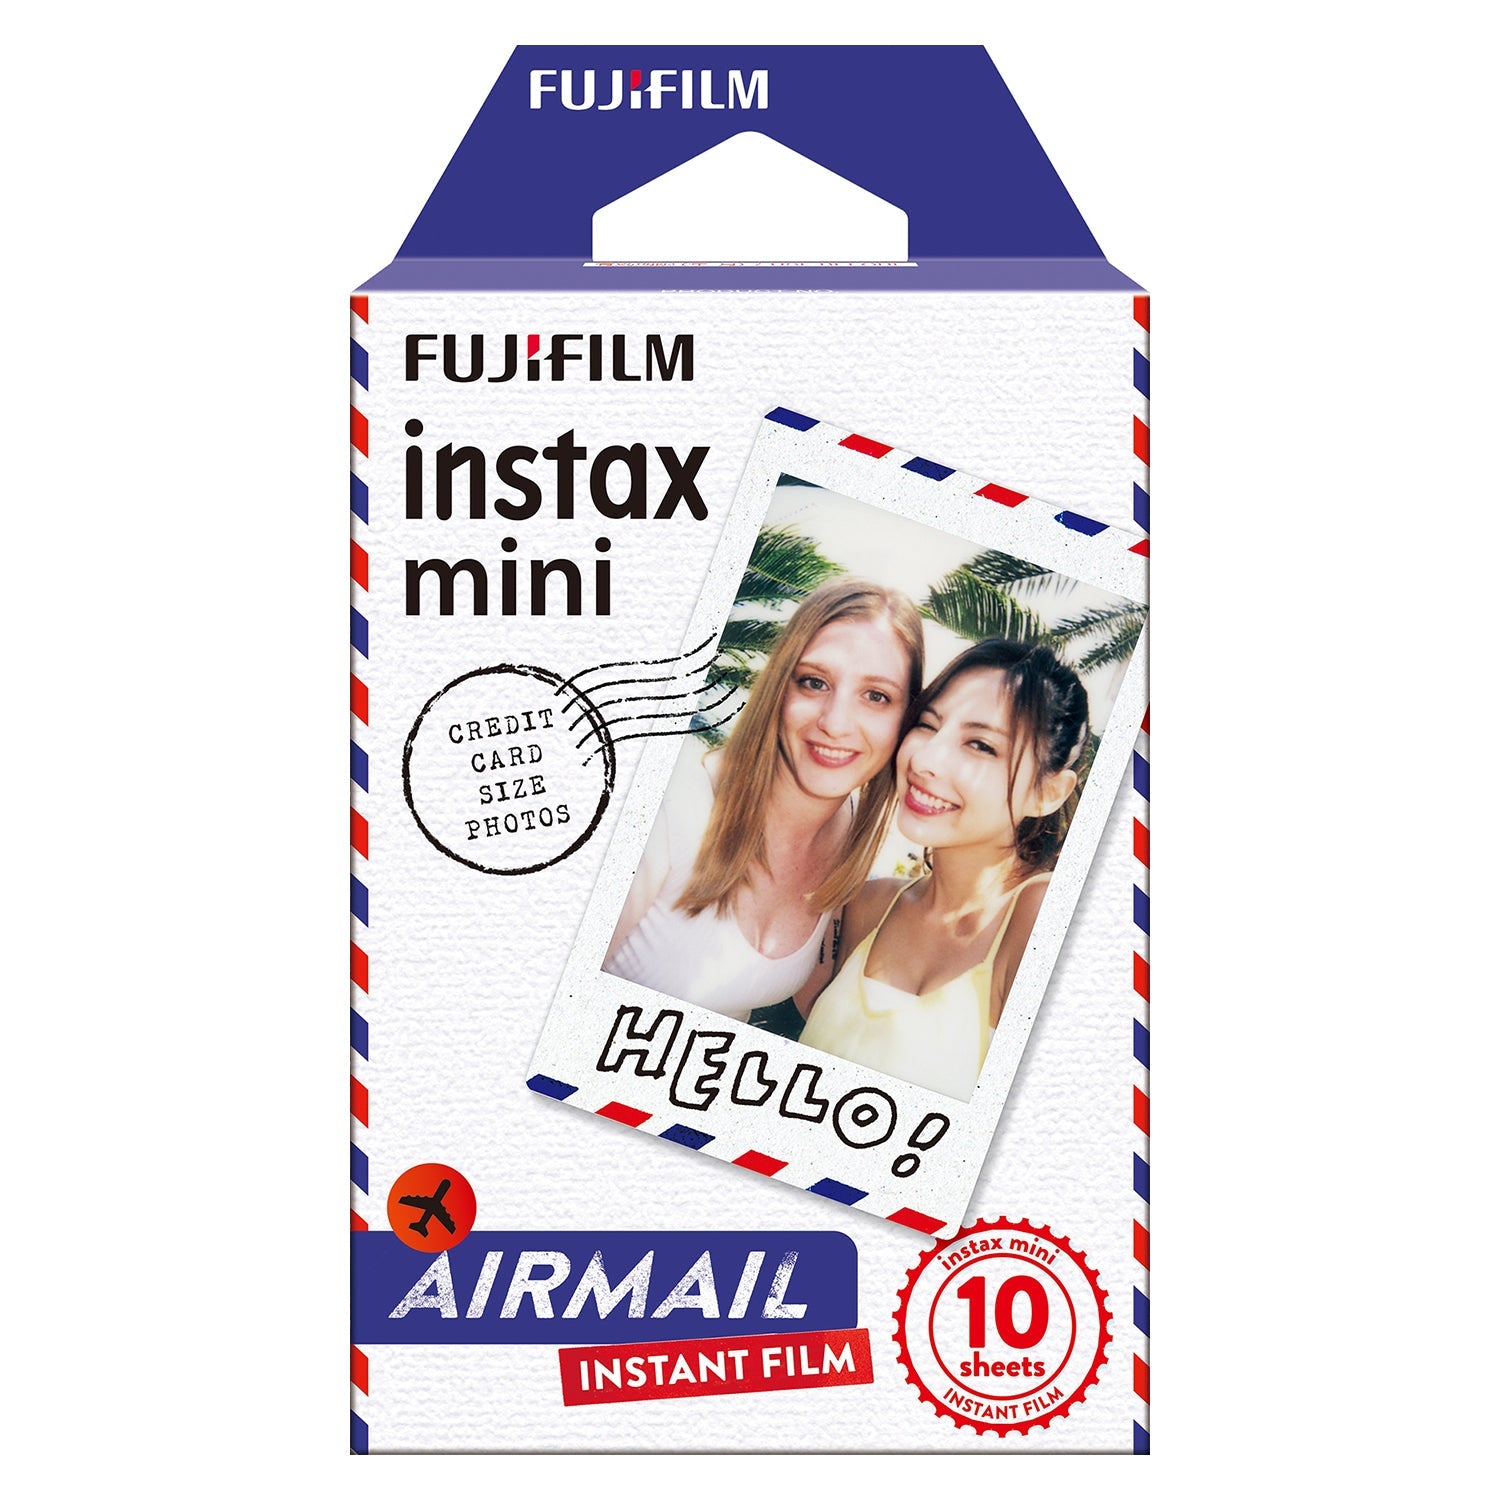 Fujifilm Instax Mini 10X1 airmail Instant Film with Instax Time Photo Album 64 Sheets (Navy blue)